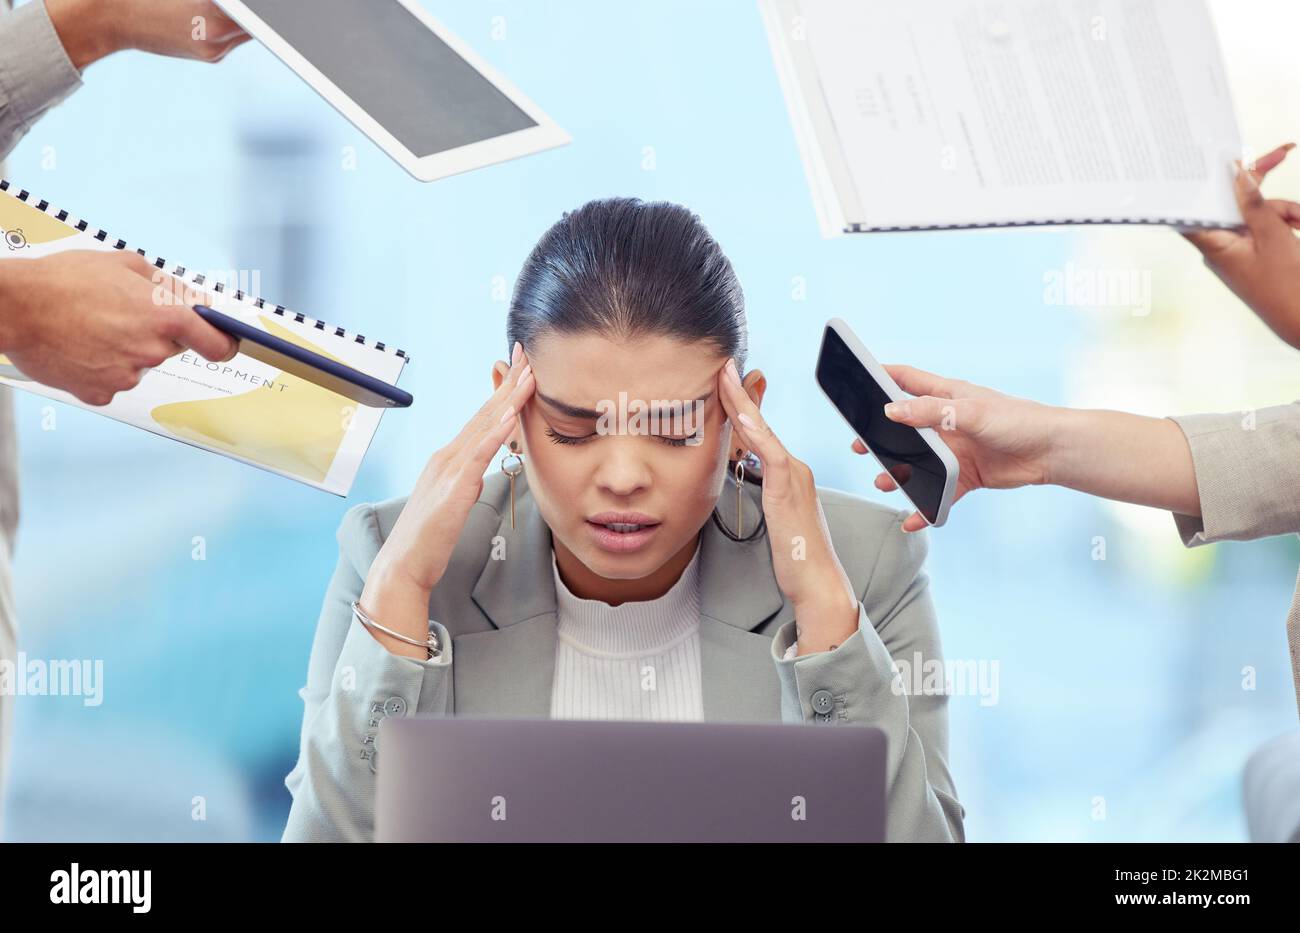 Always set healthy boundaries. Shot of a young woman having a stressful day at work. Stock Photo